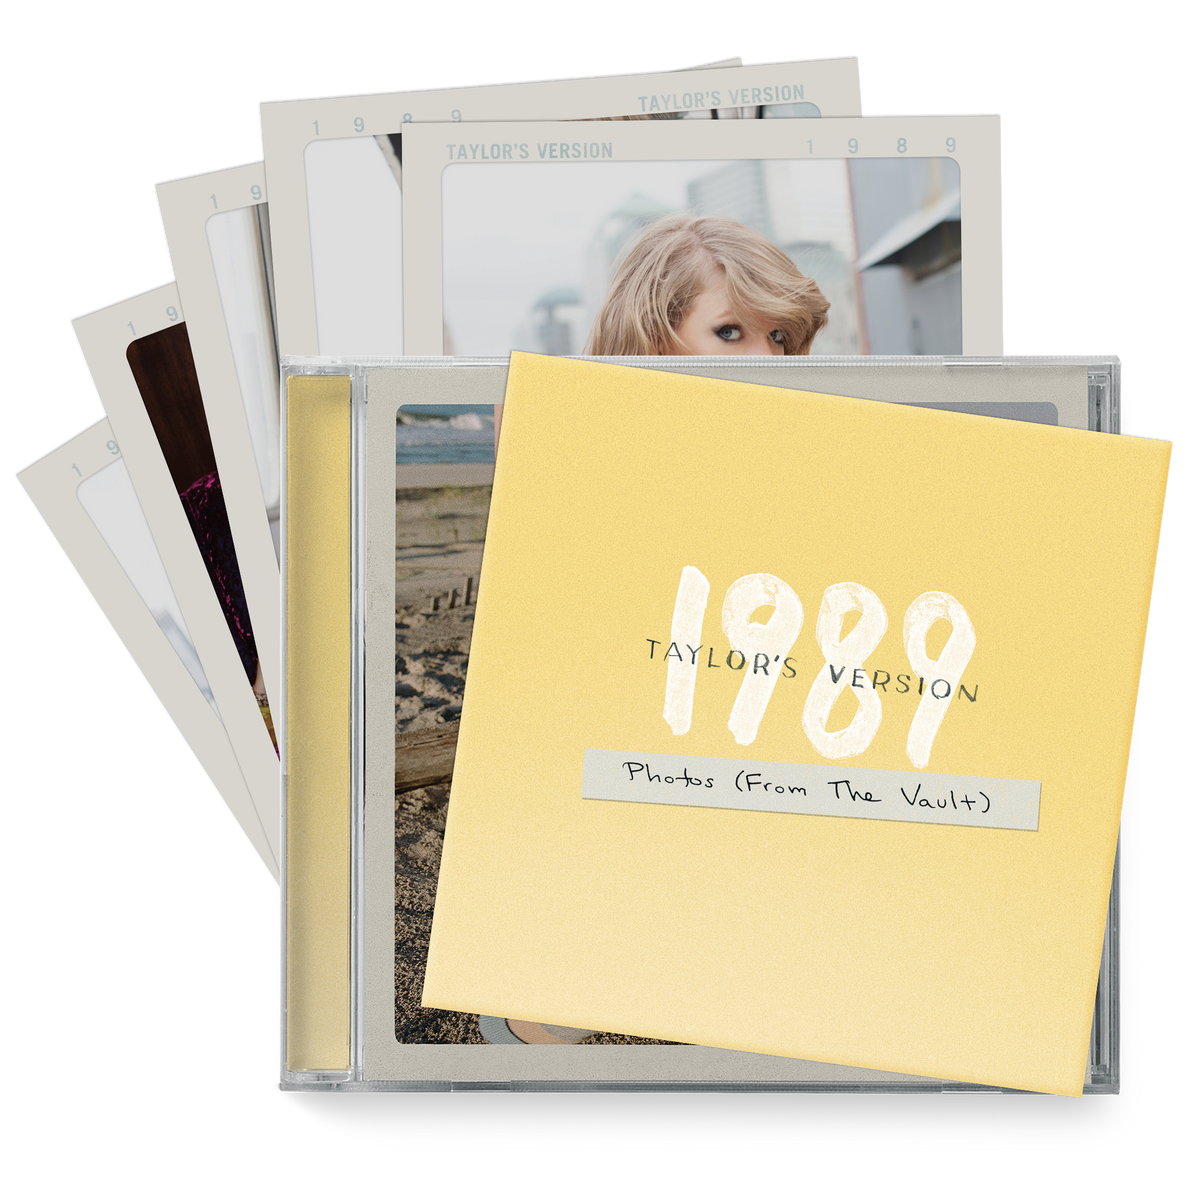 Taylor Swift - 1989 (Taylor's Version) CD Deluxe Amarillo